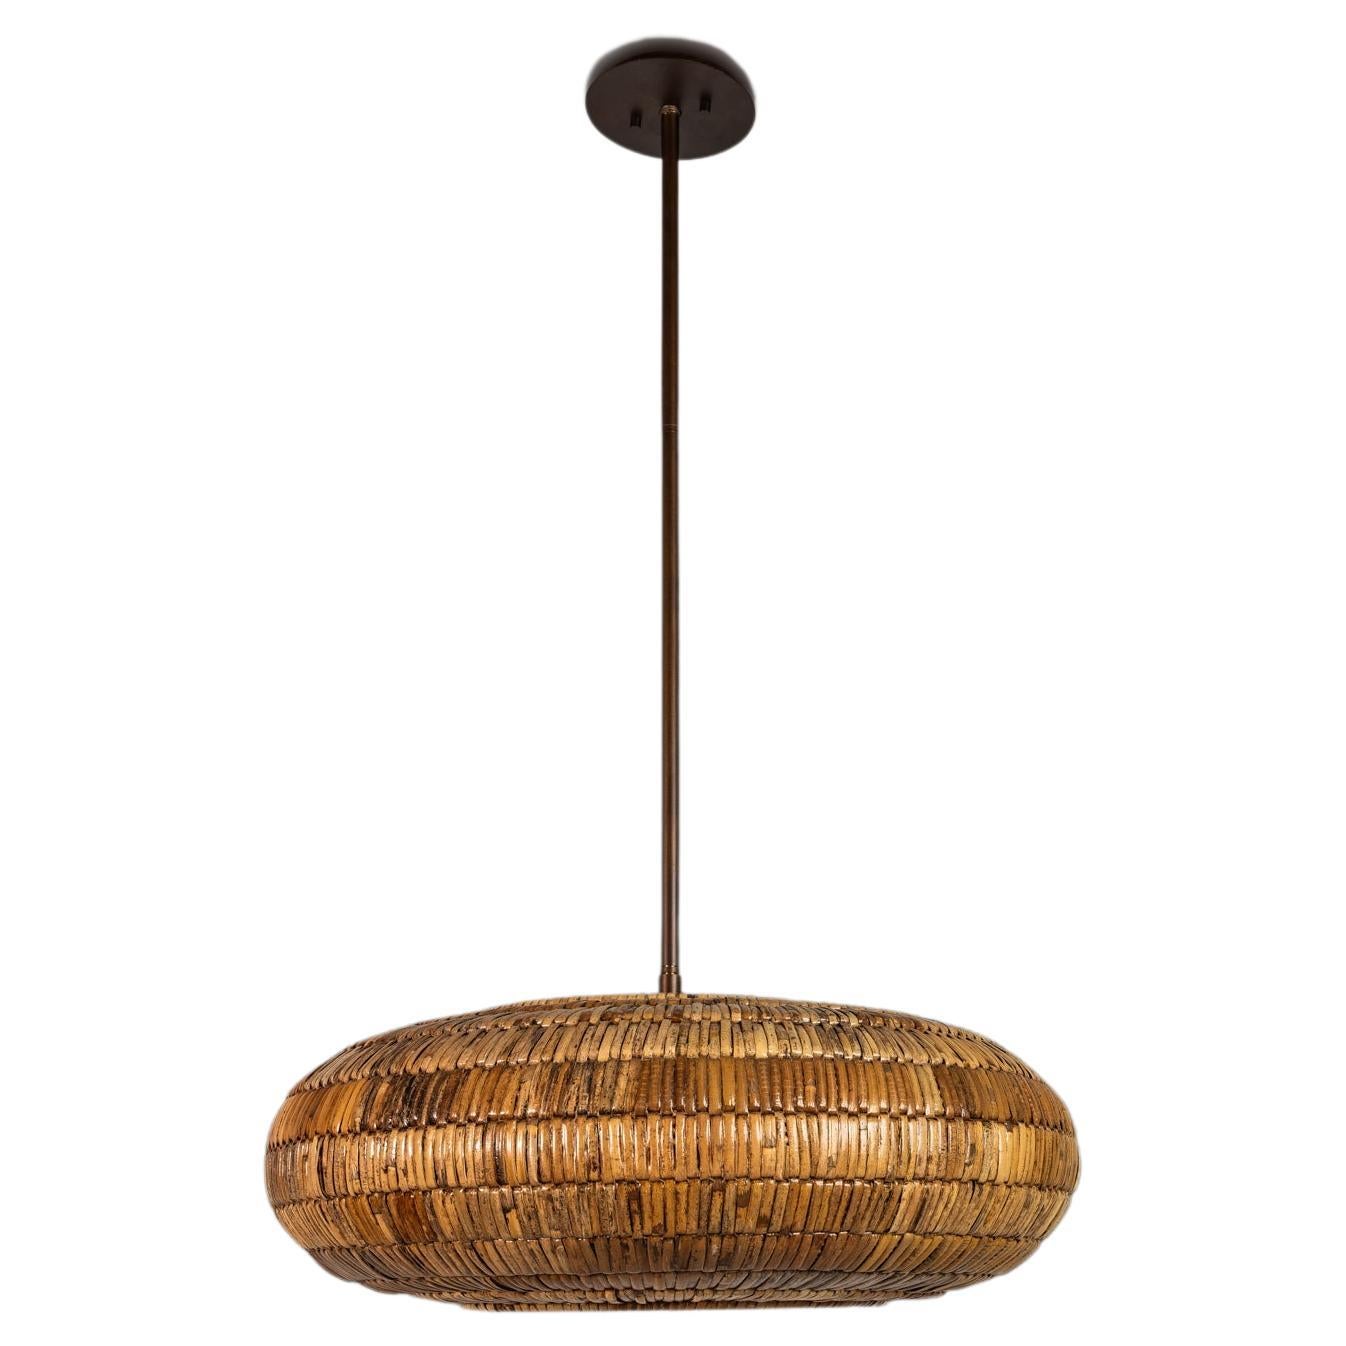 Mid-Century Rattan Ceiling Lamp by Breuer for Troy Lighting, USA, c. 2000s